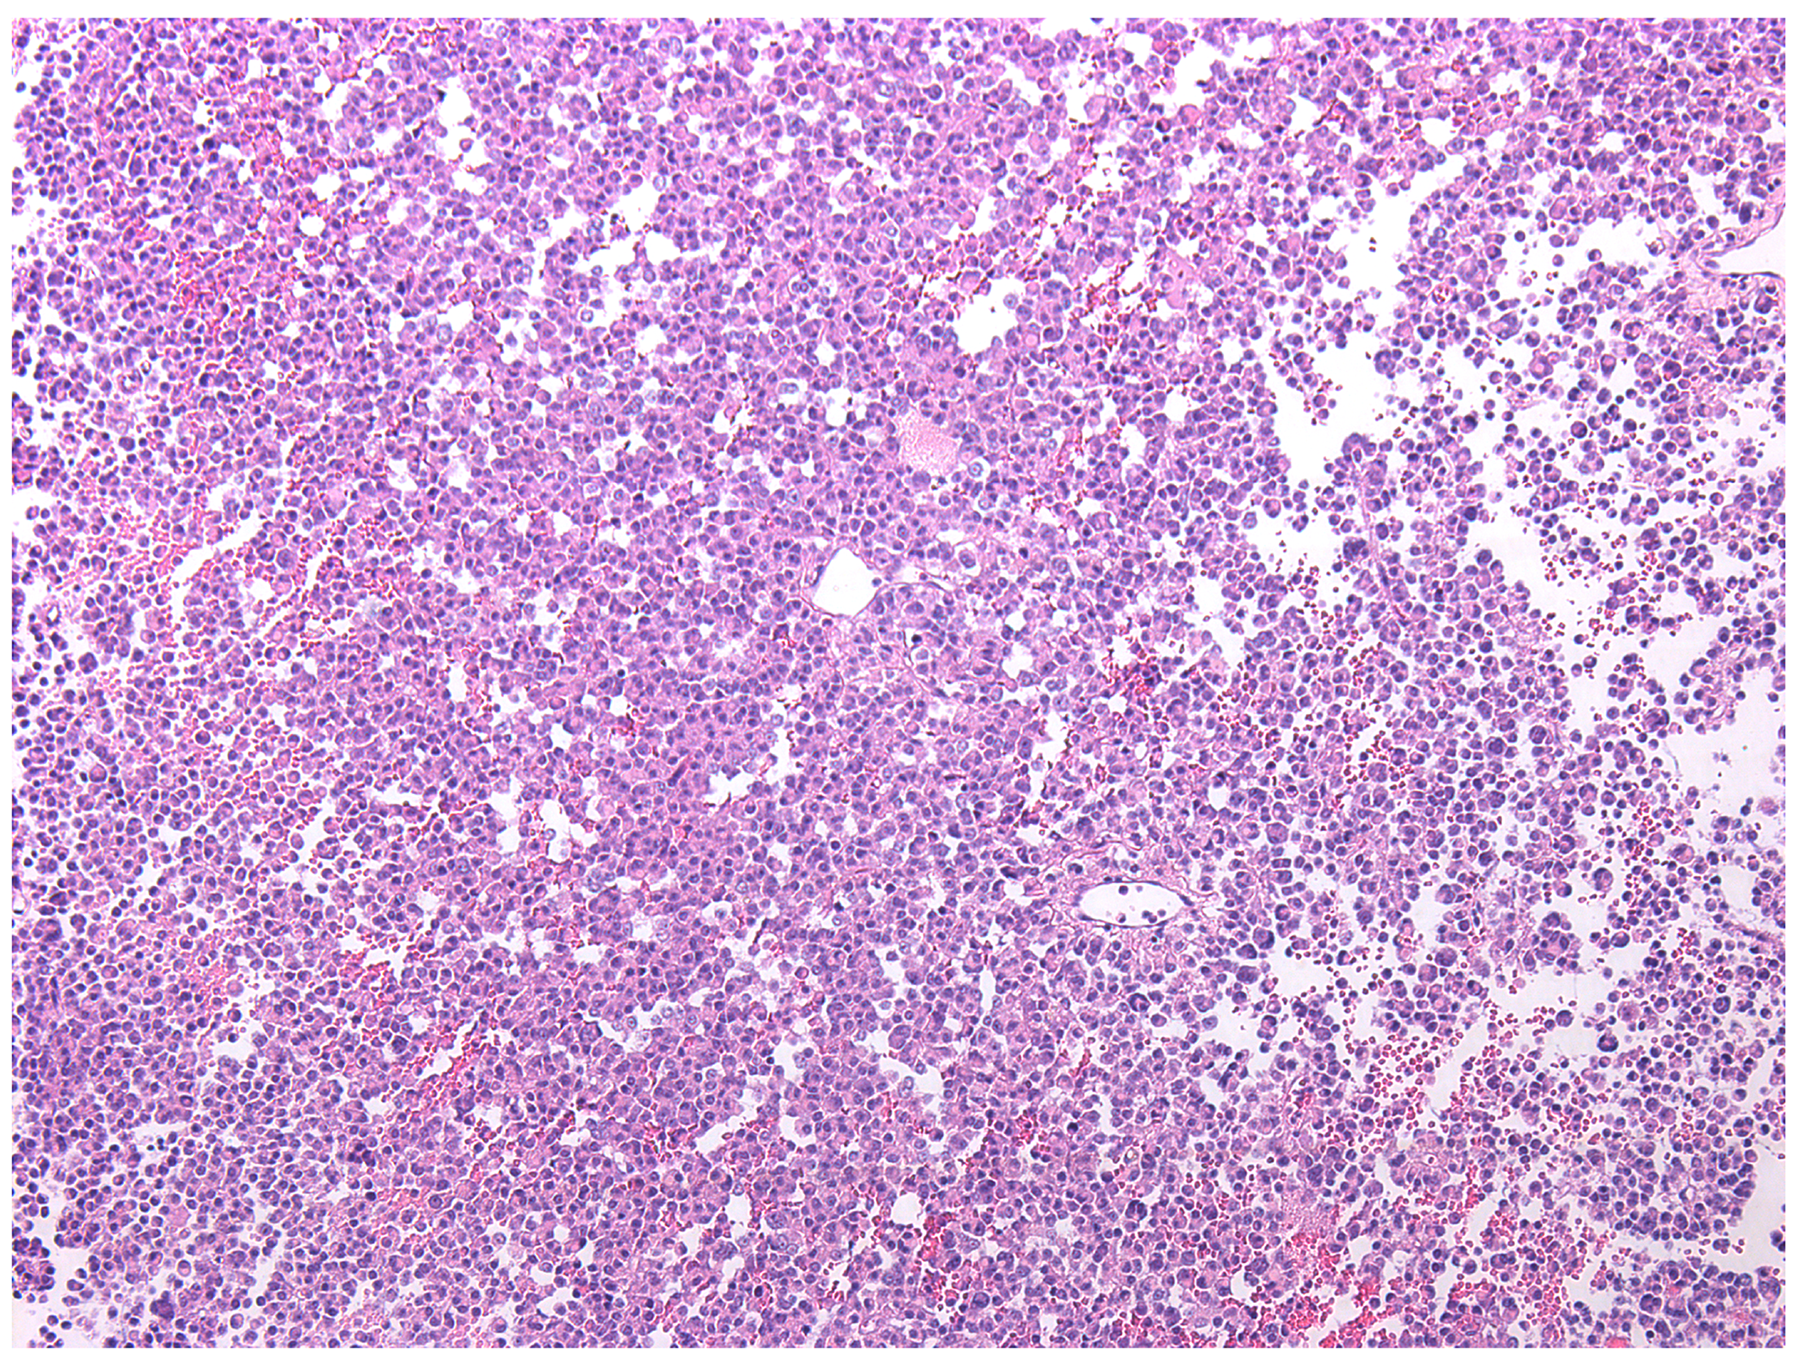 Plurihormonal pituitary adenoma with trabecular structure, hematoxylin and eosin, &#x00D7;100.